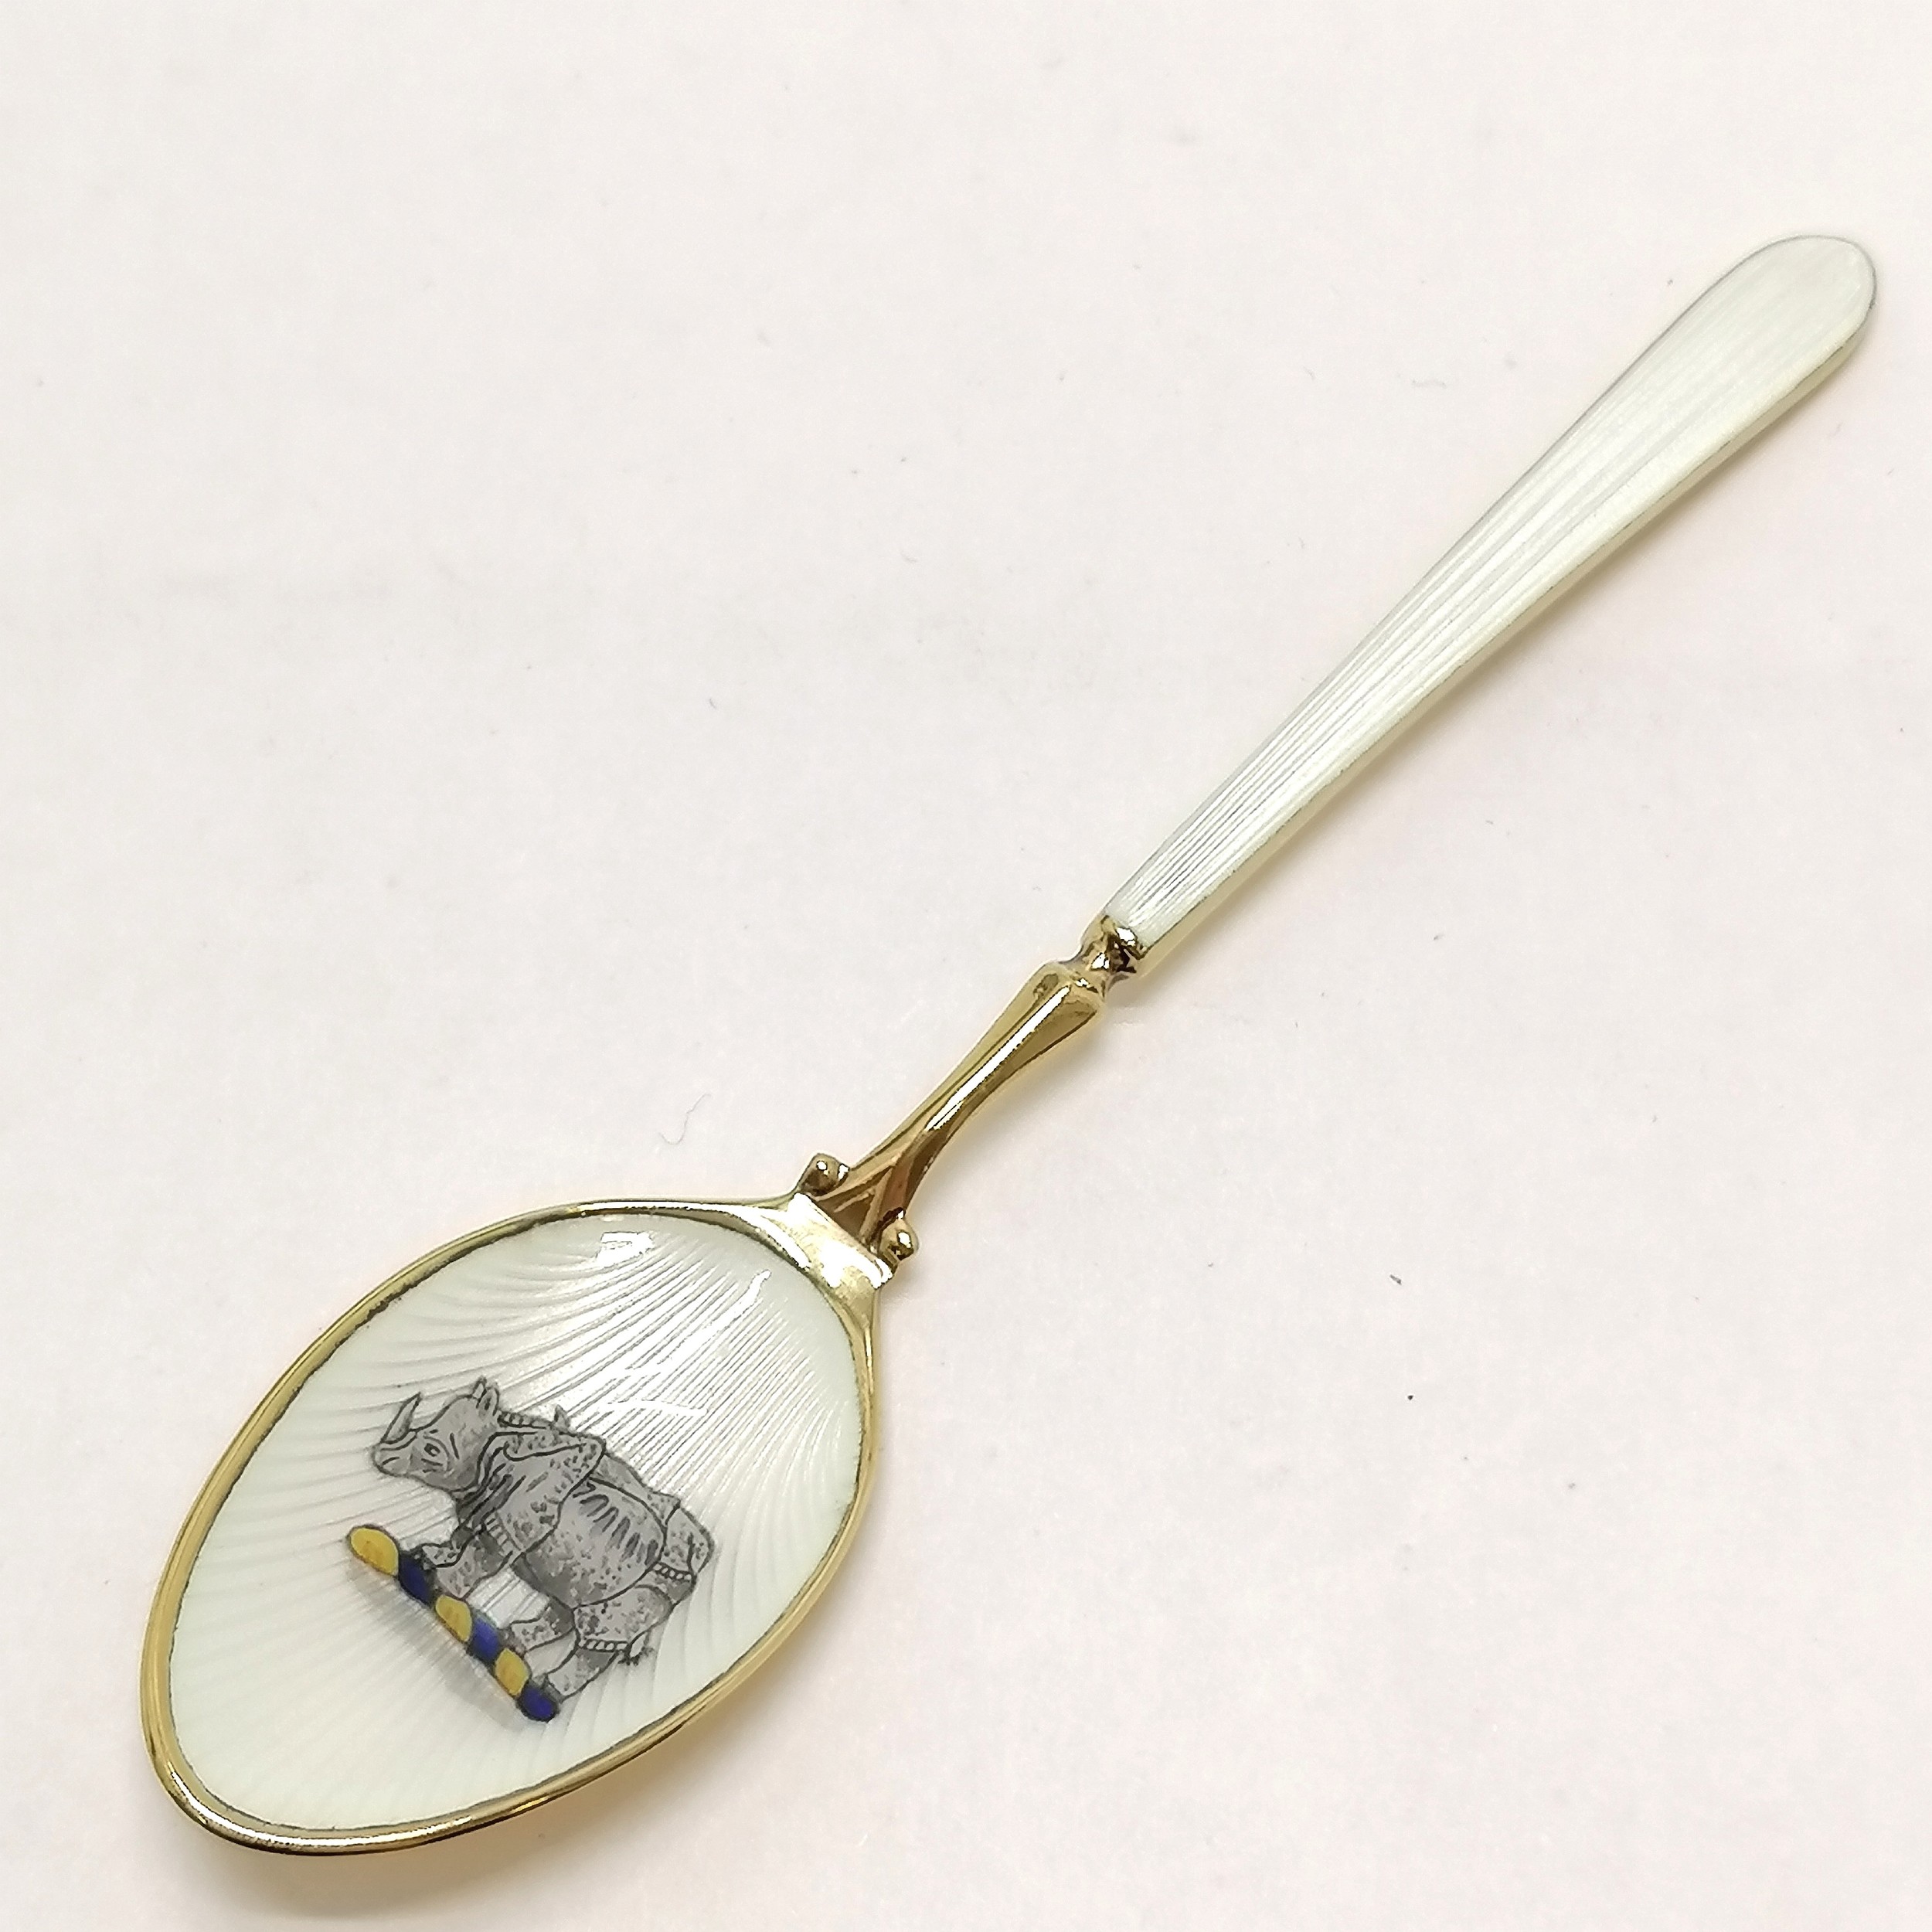 Sterling silver 'The Worshipful Society of Apothecaries' enamel spoon with Dürer's Rhinoceros - Image 2 of 4